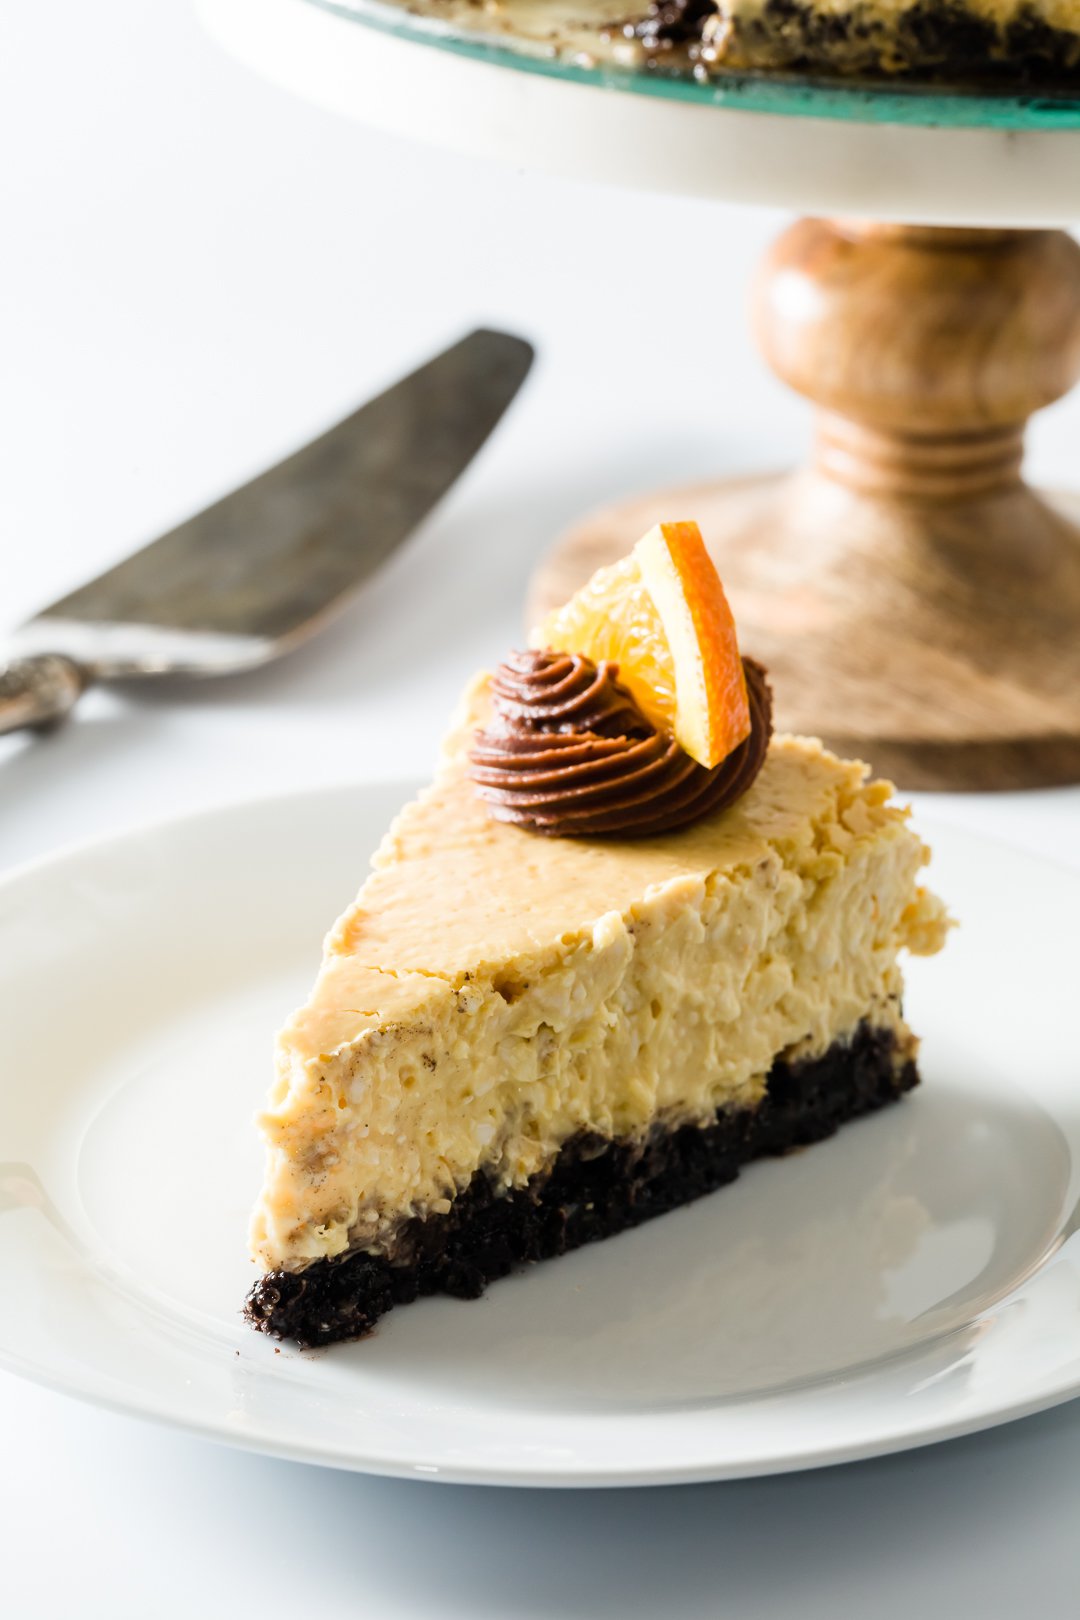 Orange Cheesecake with Oreo Crust from Cupcake Project